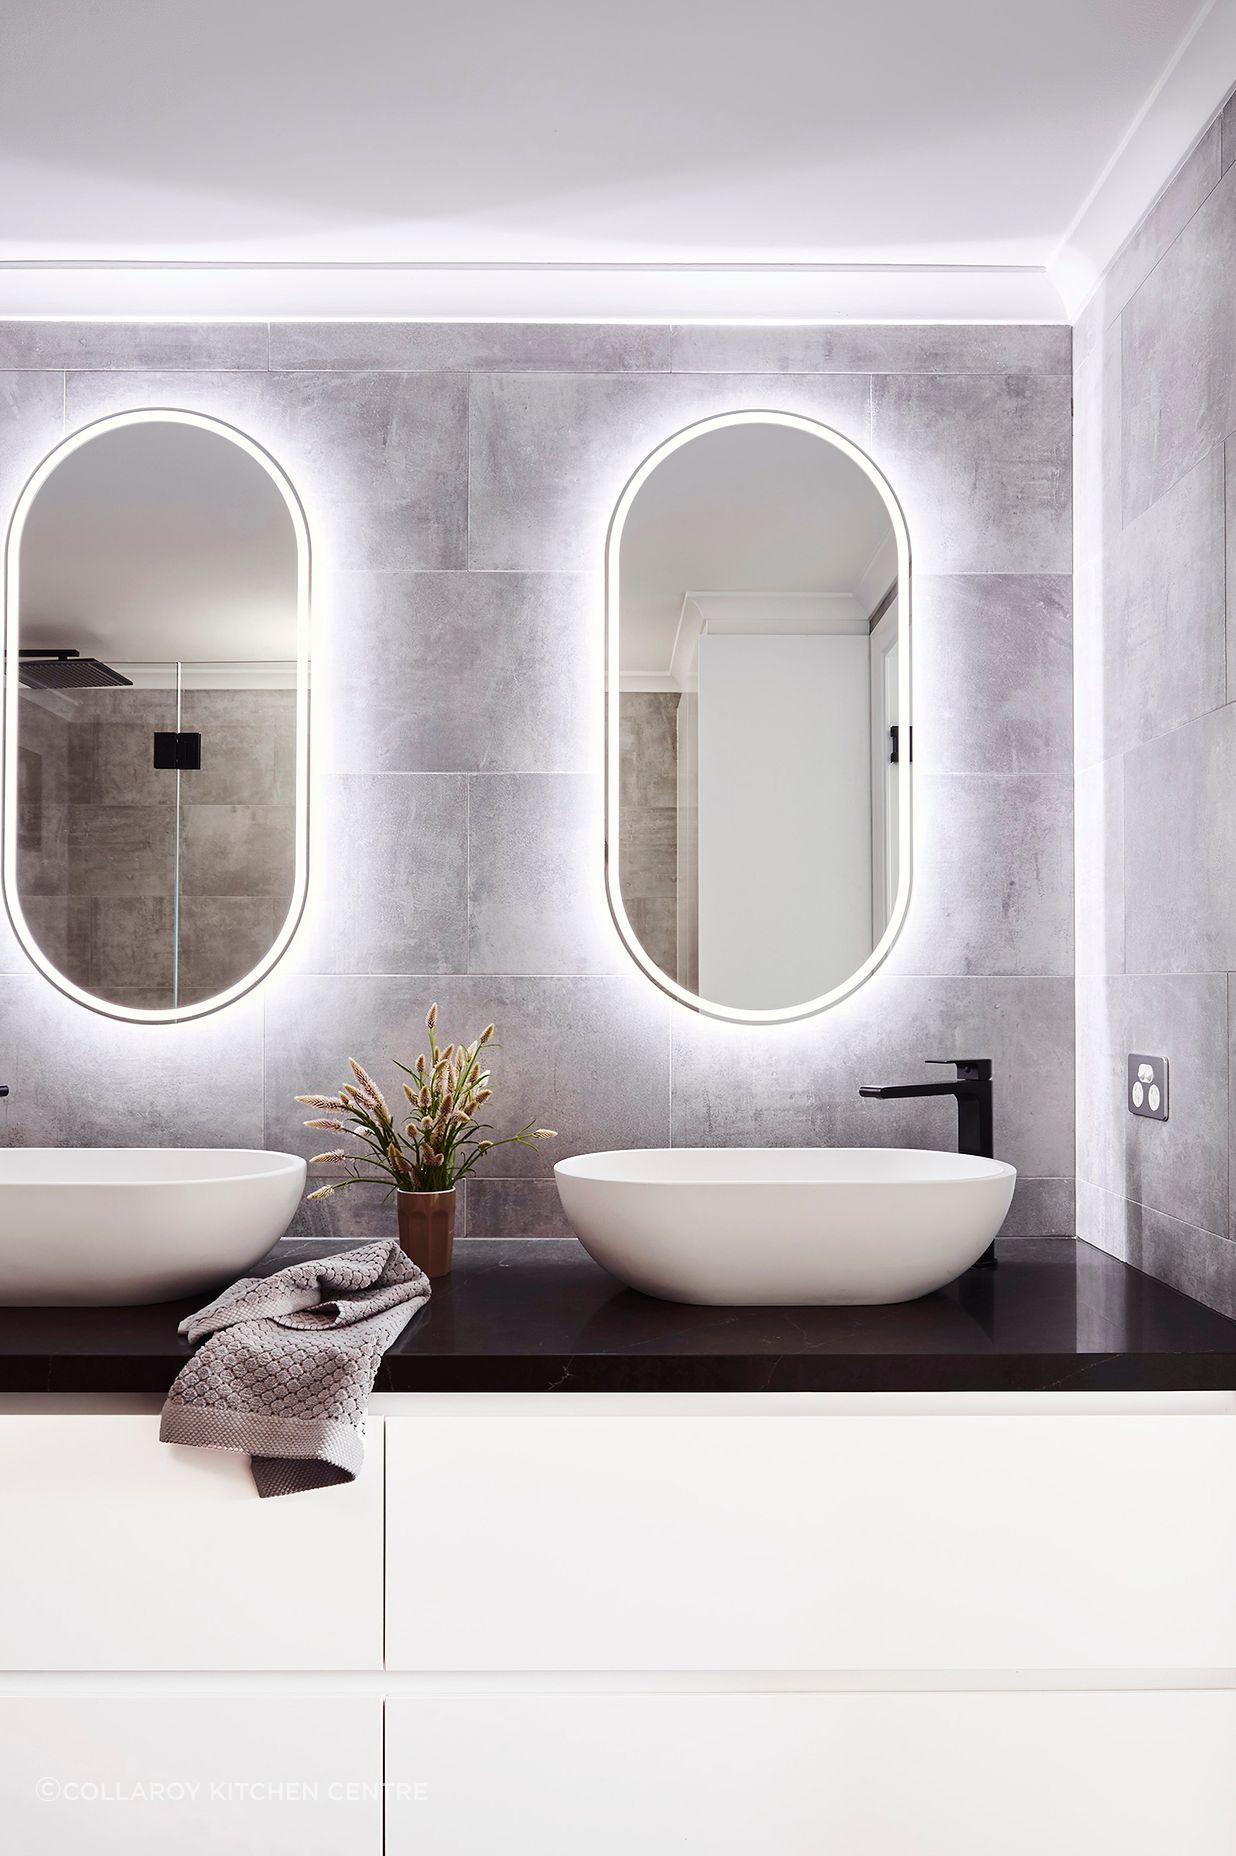 Lighted mirrors are a convenient way to add functionality and extra light to a bathroom